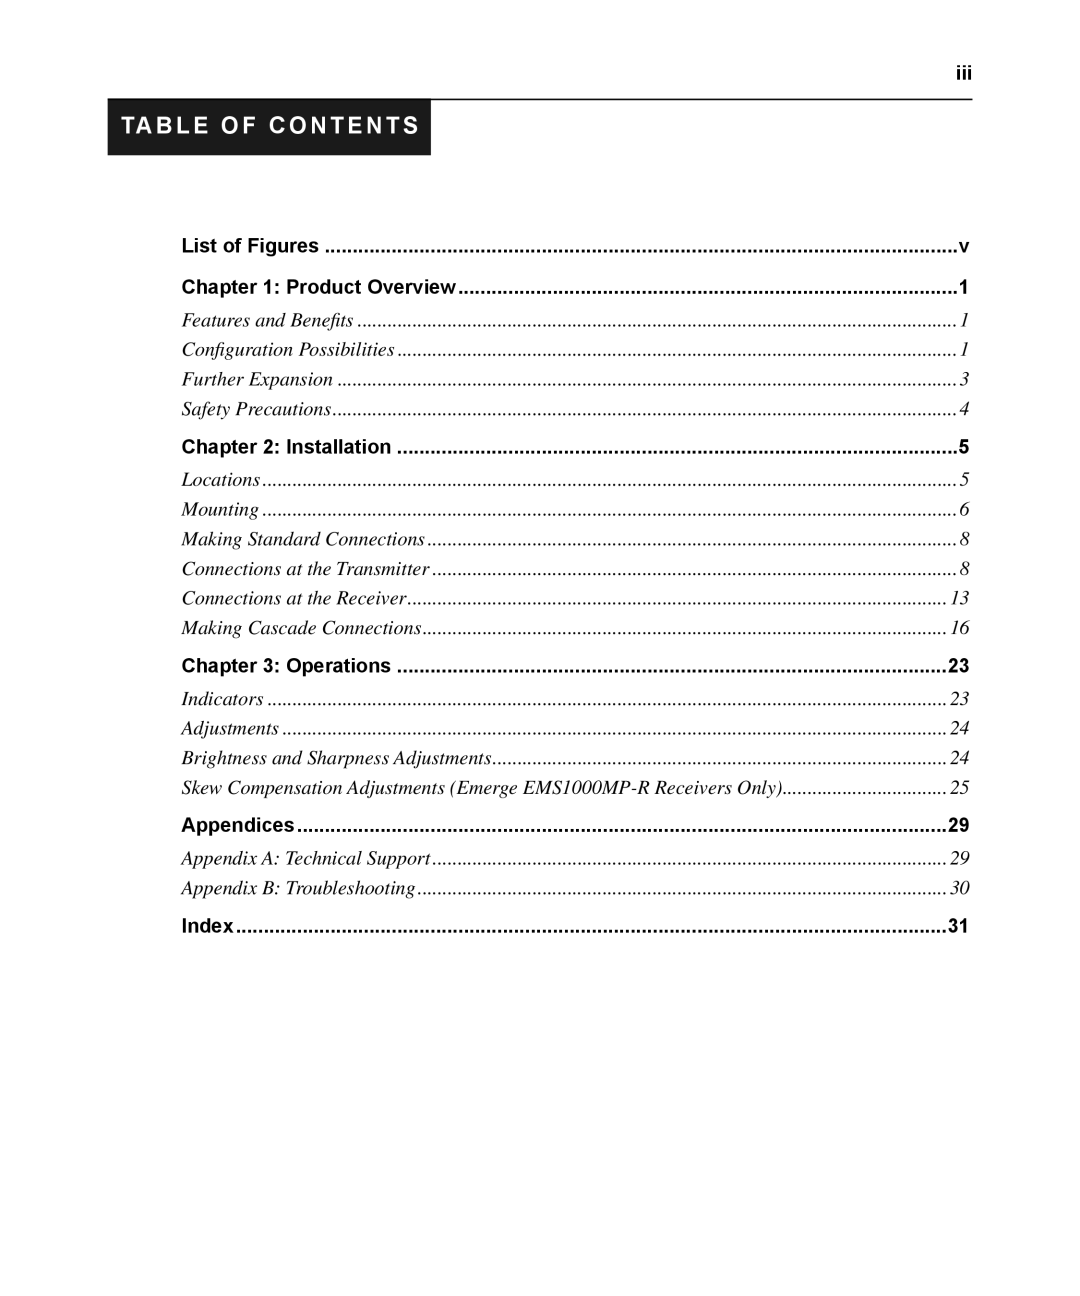 Avocent EMS1000P manual Table Of Contents 